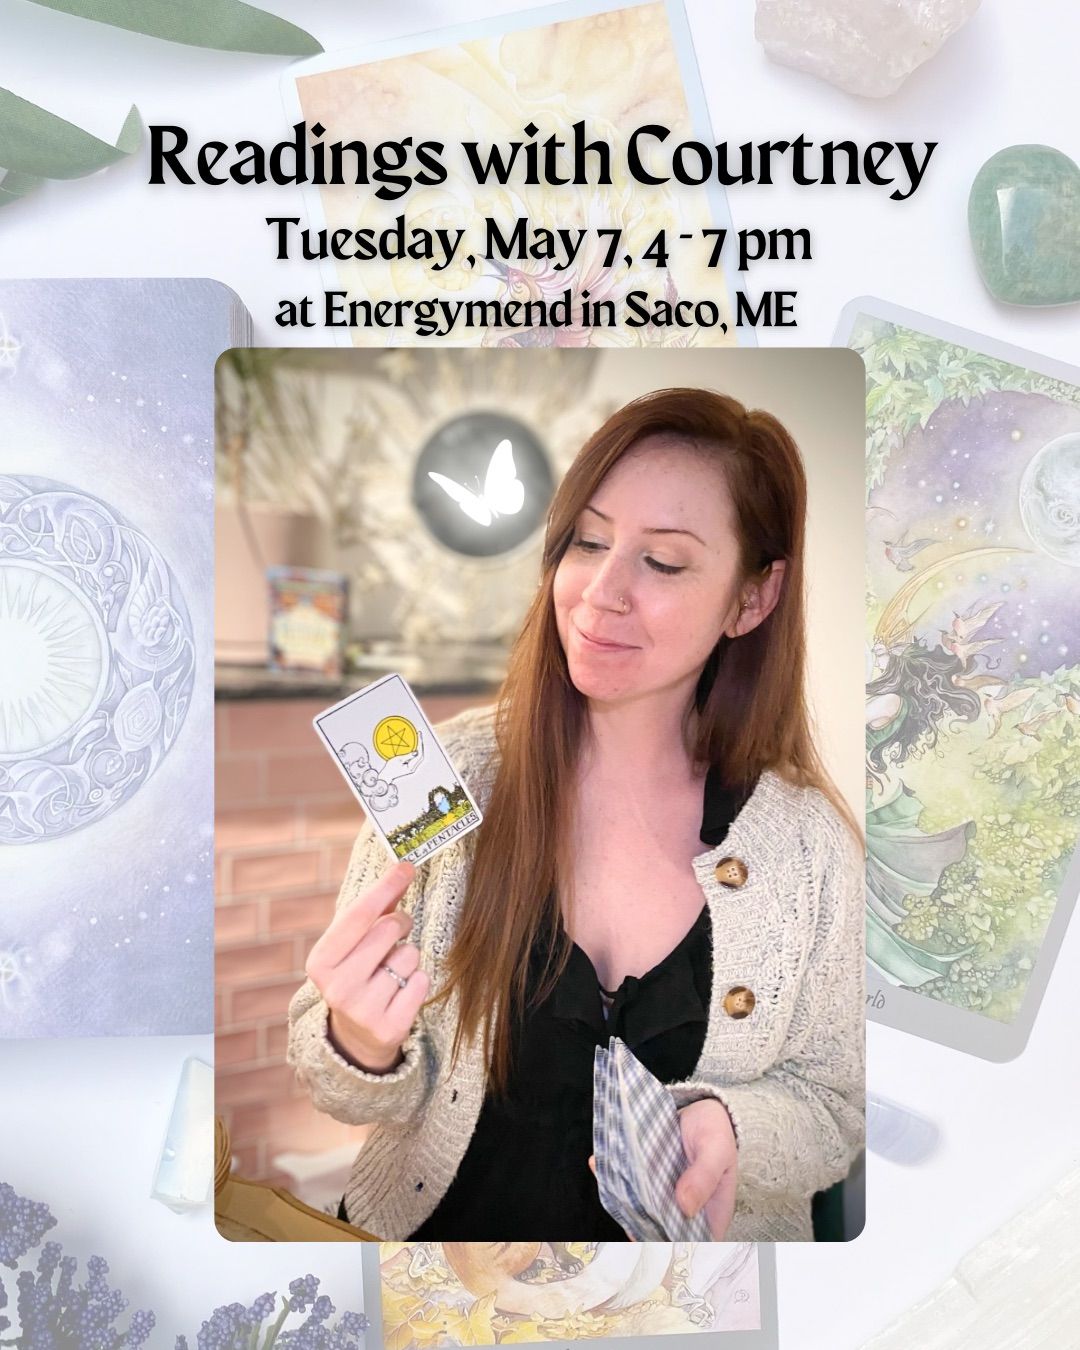 Readings with Courtney at Energymend